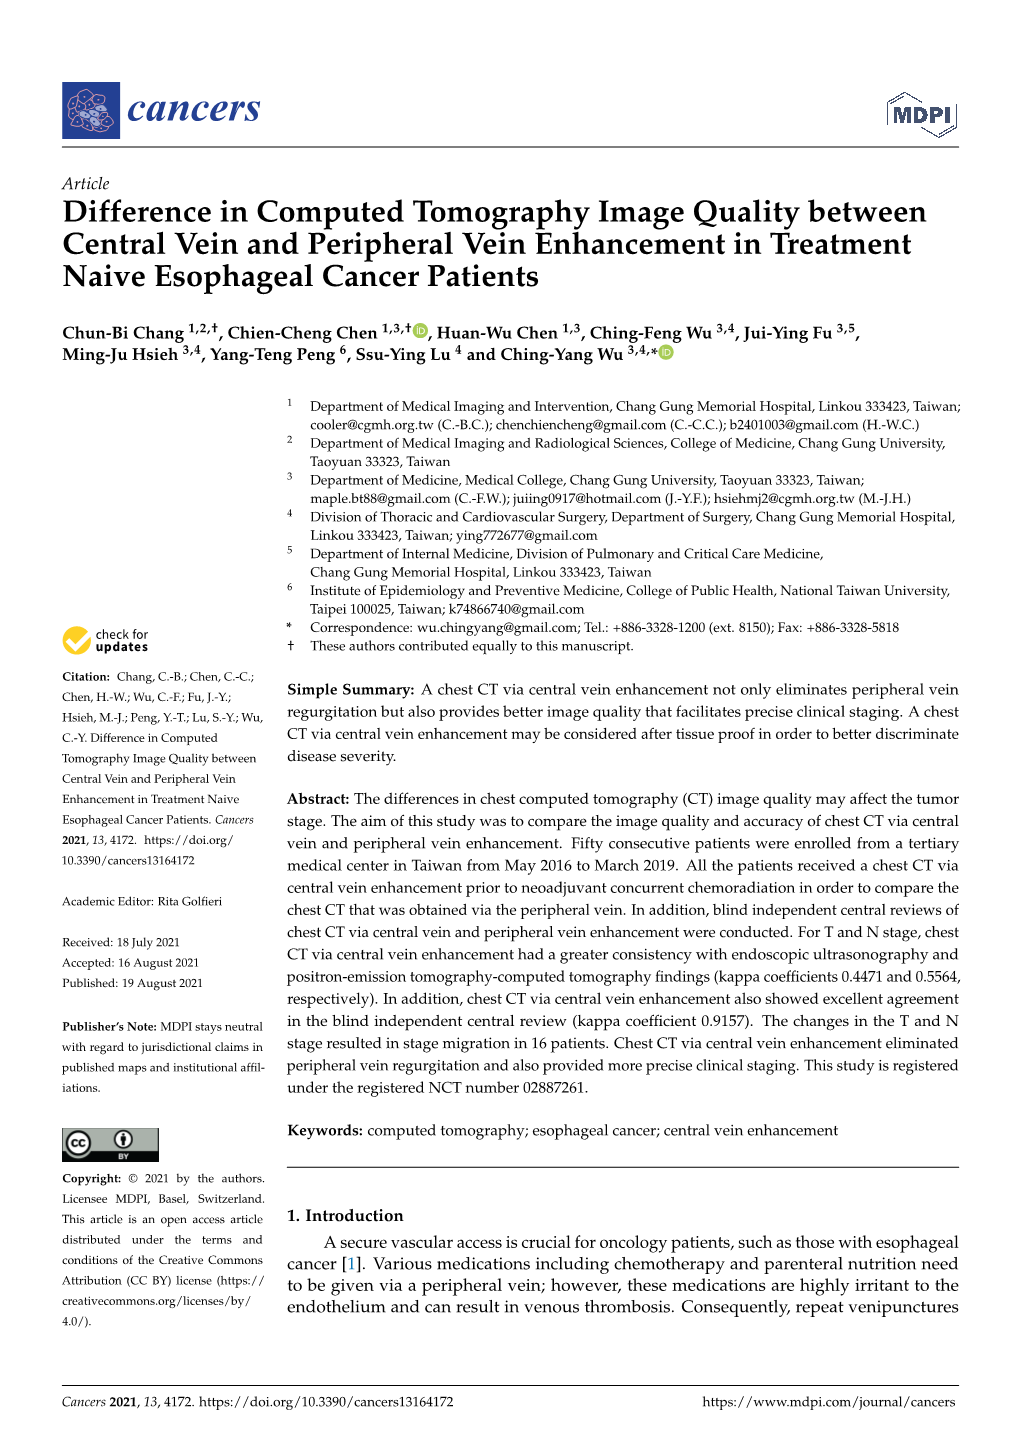 Difference in Computed Tomography Image Quality Between Central Vein and Peripheral Vein Enhancement in Treatment Naive Esophageal Cancer Patients